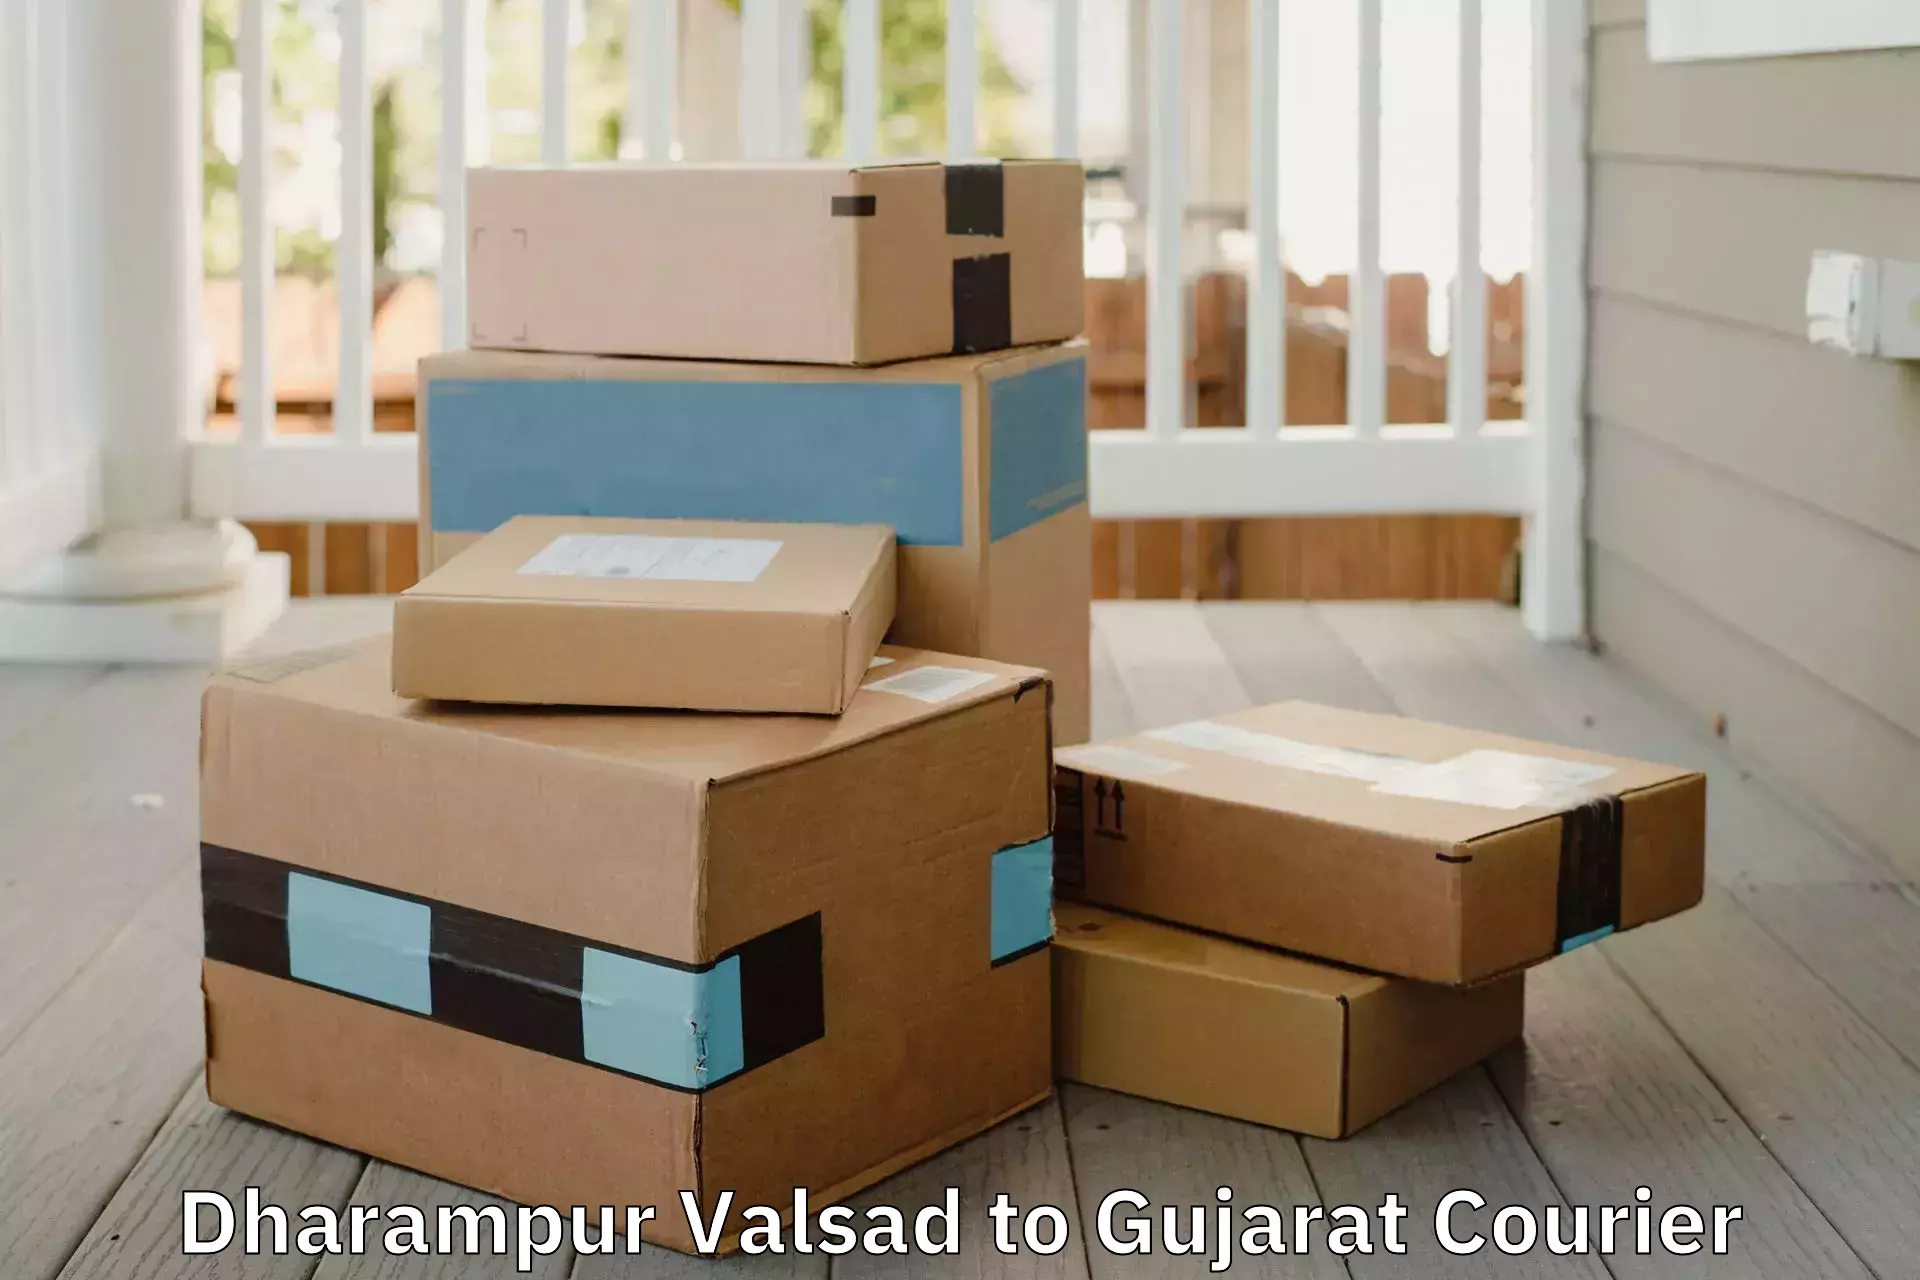 Reliable movers Dharampur Valsad to GIDC